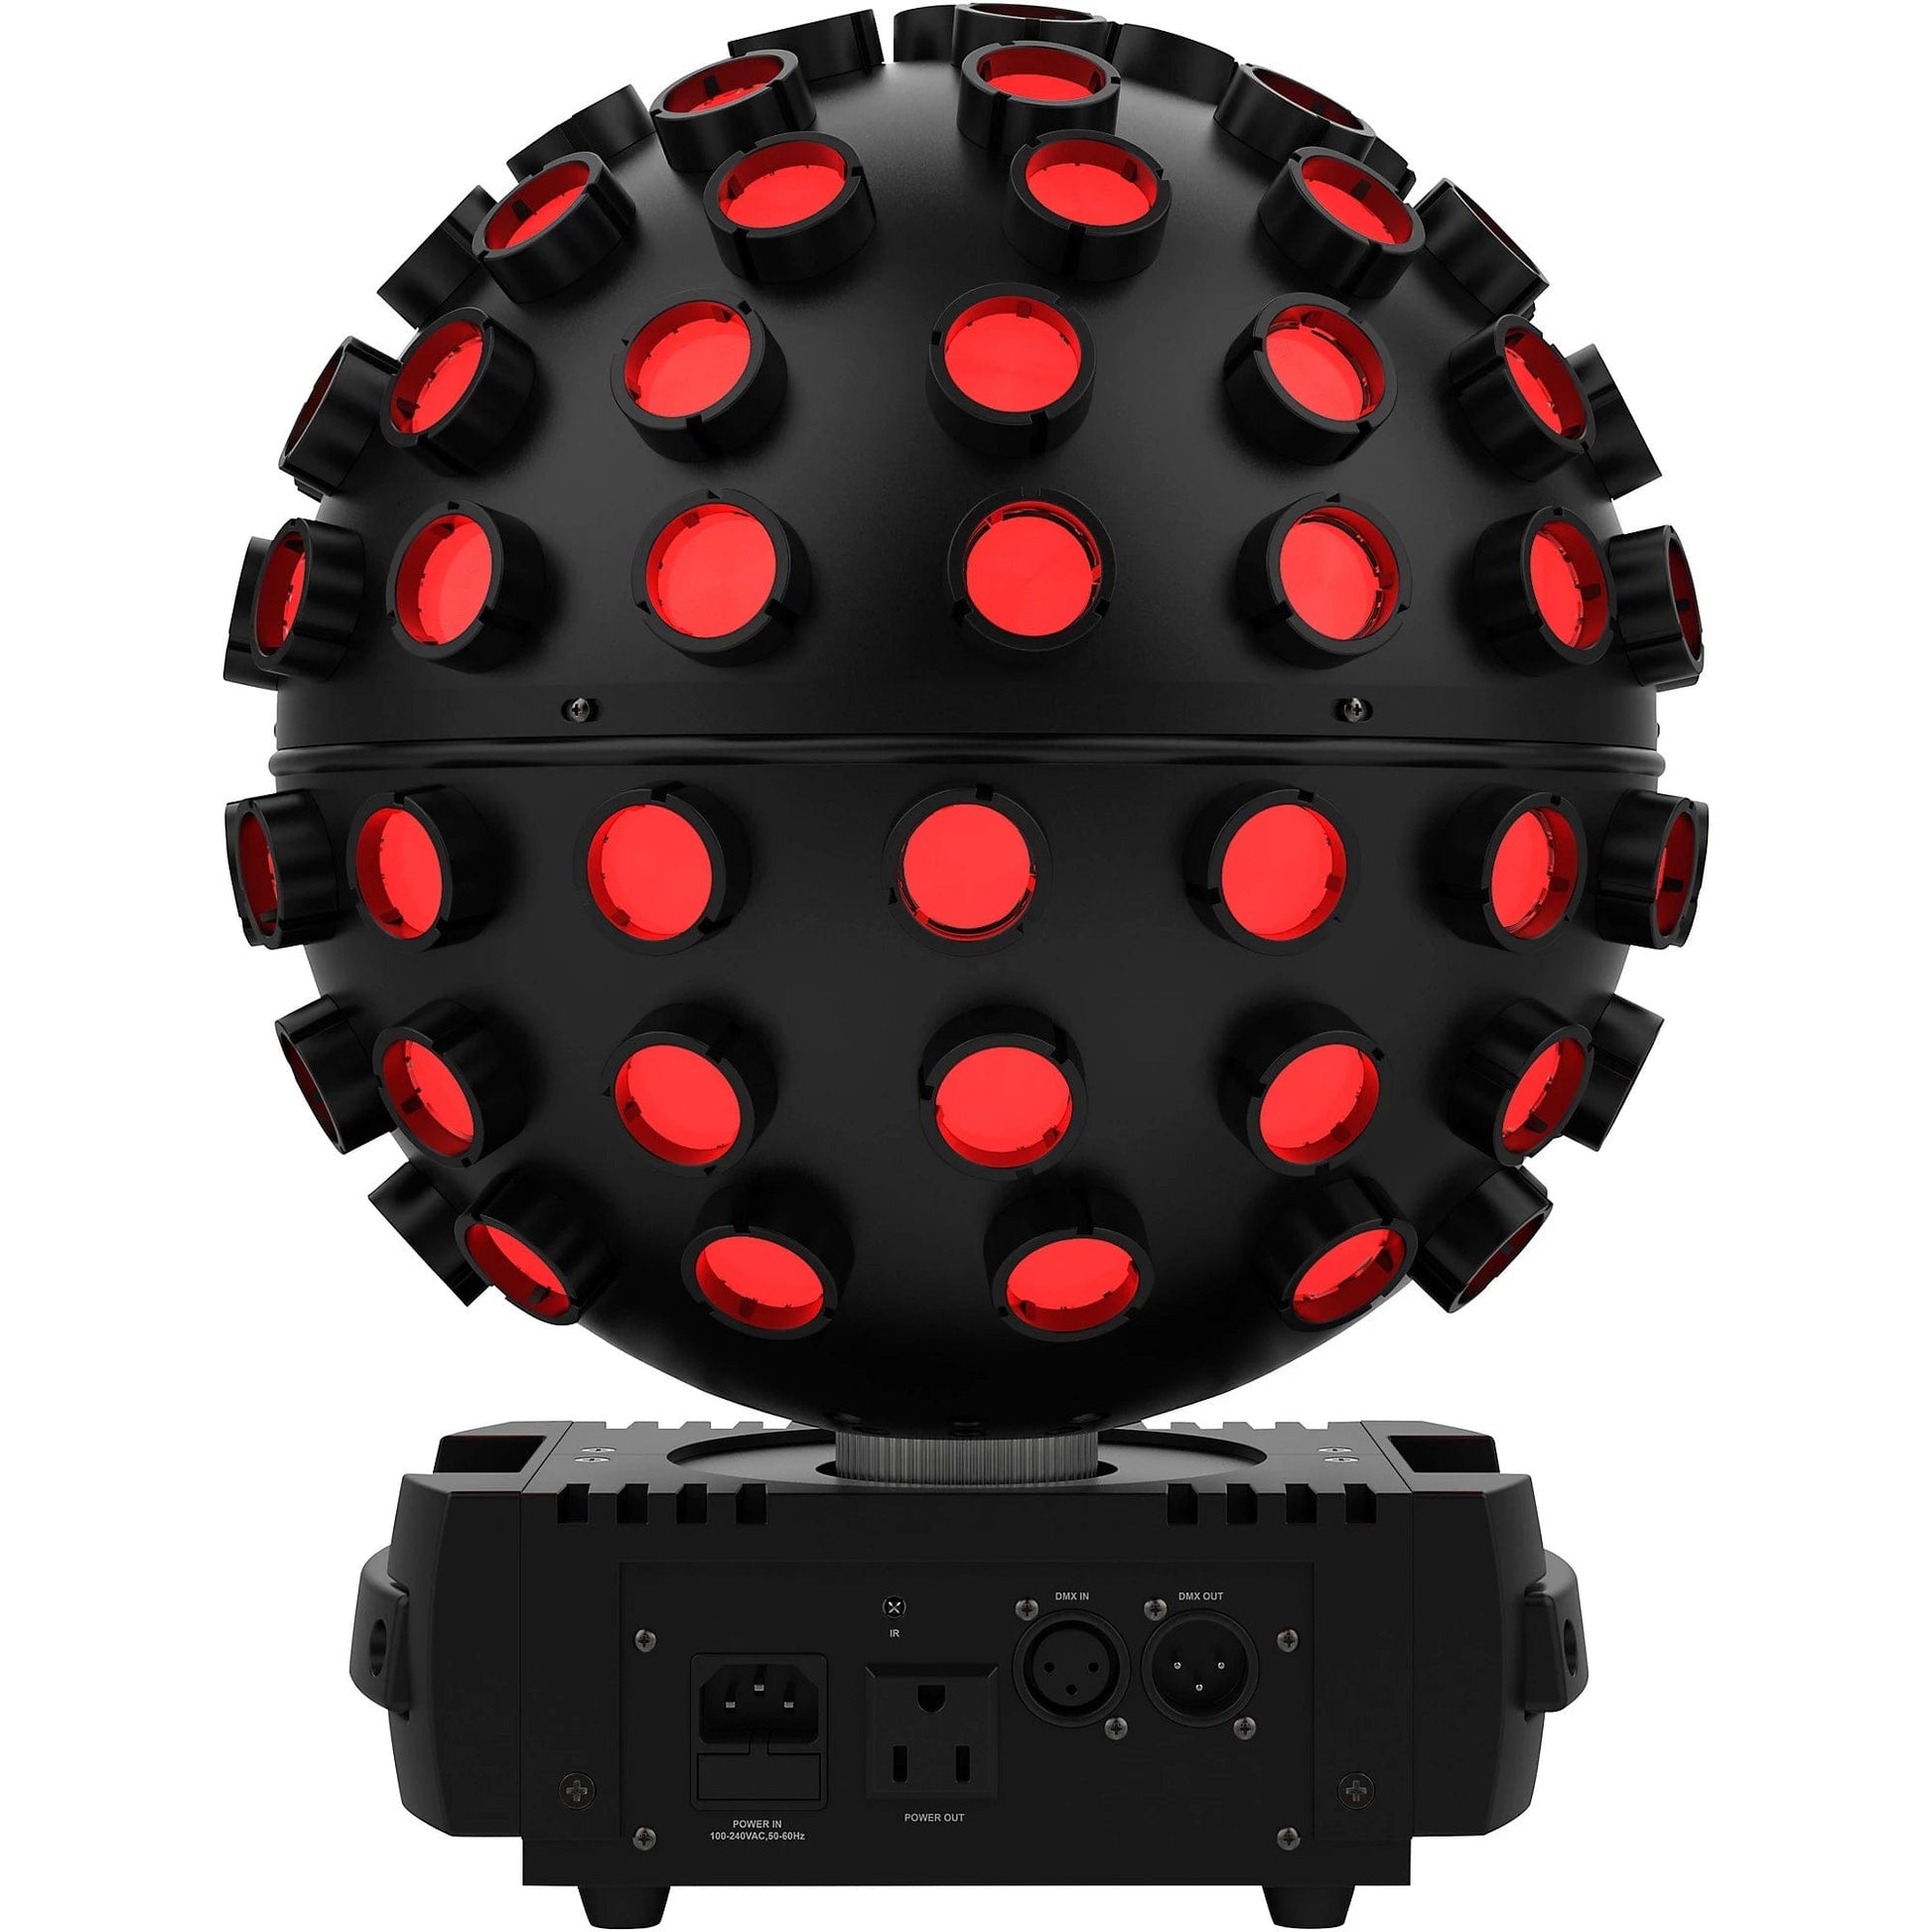 Chauvet DJ ROTOSPHEREHP Rotosphere HP 8-Color Mirror Ball Effect - Black - PSSL ProSound and Stage Lighting